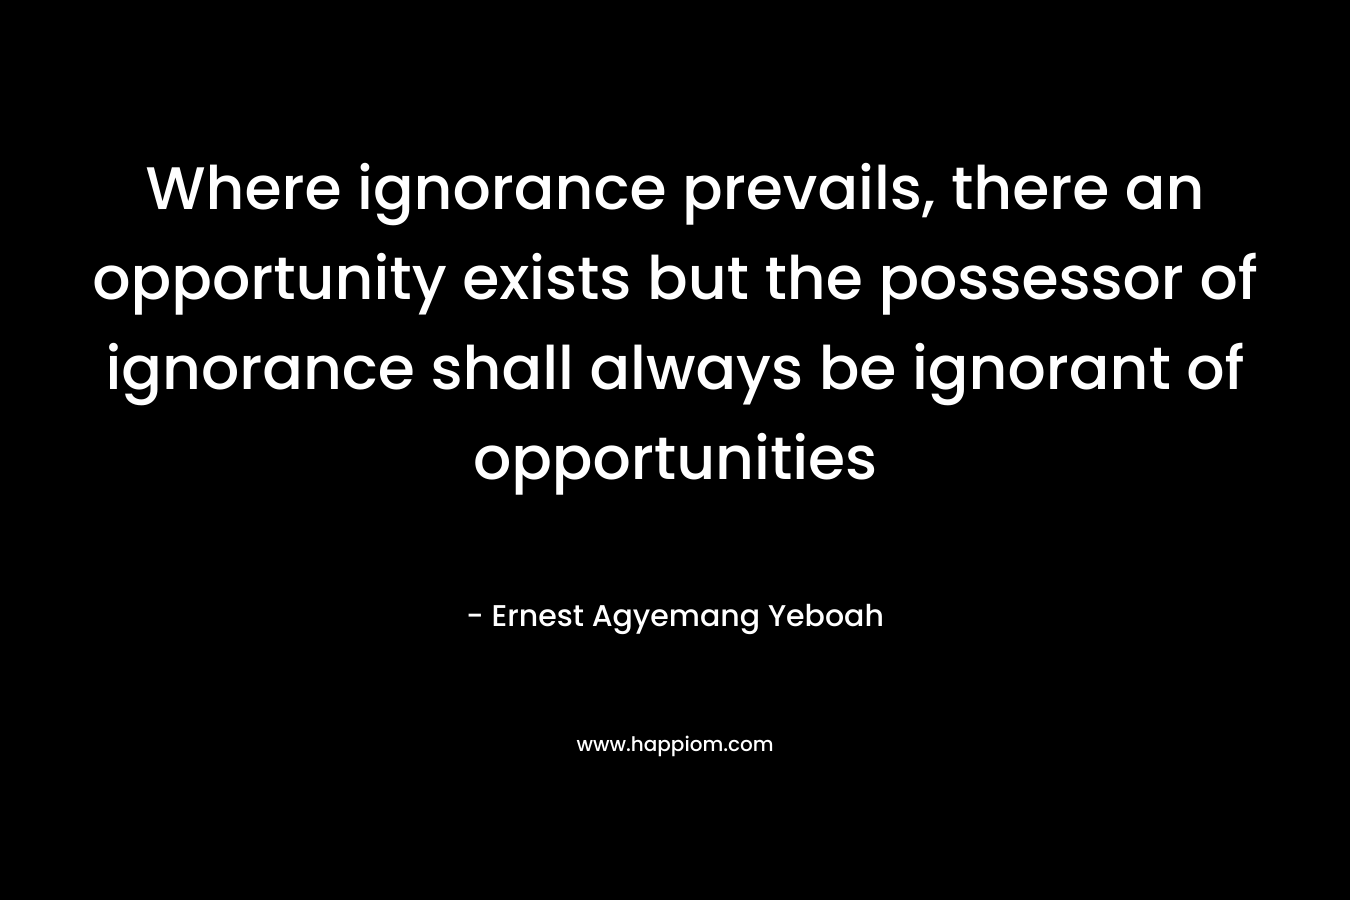 Where ignorance prevails, there an opportunity exists but the possessor of ignorance shall always be ignorant of opportunities